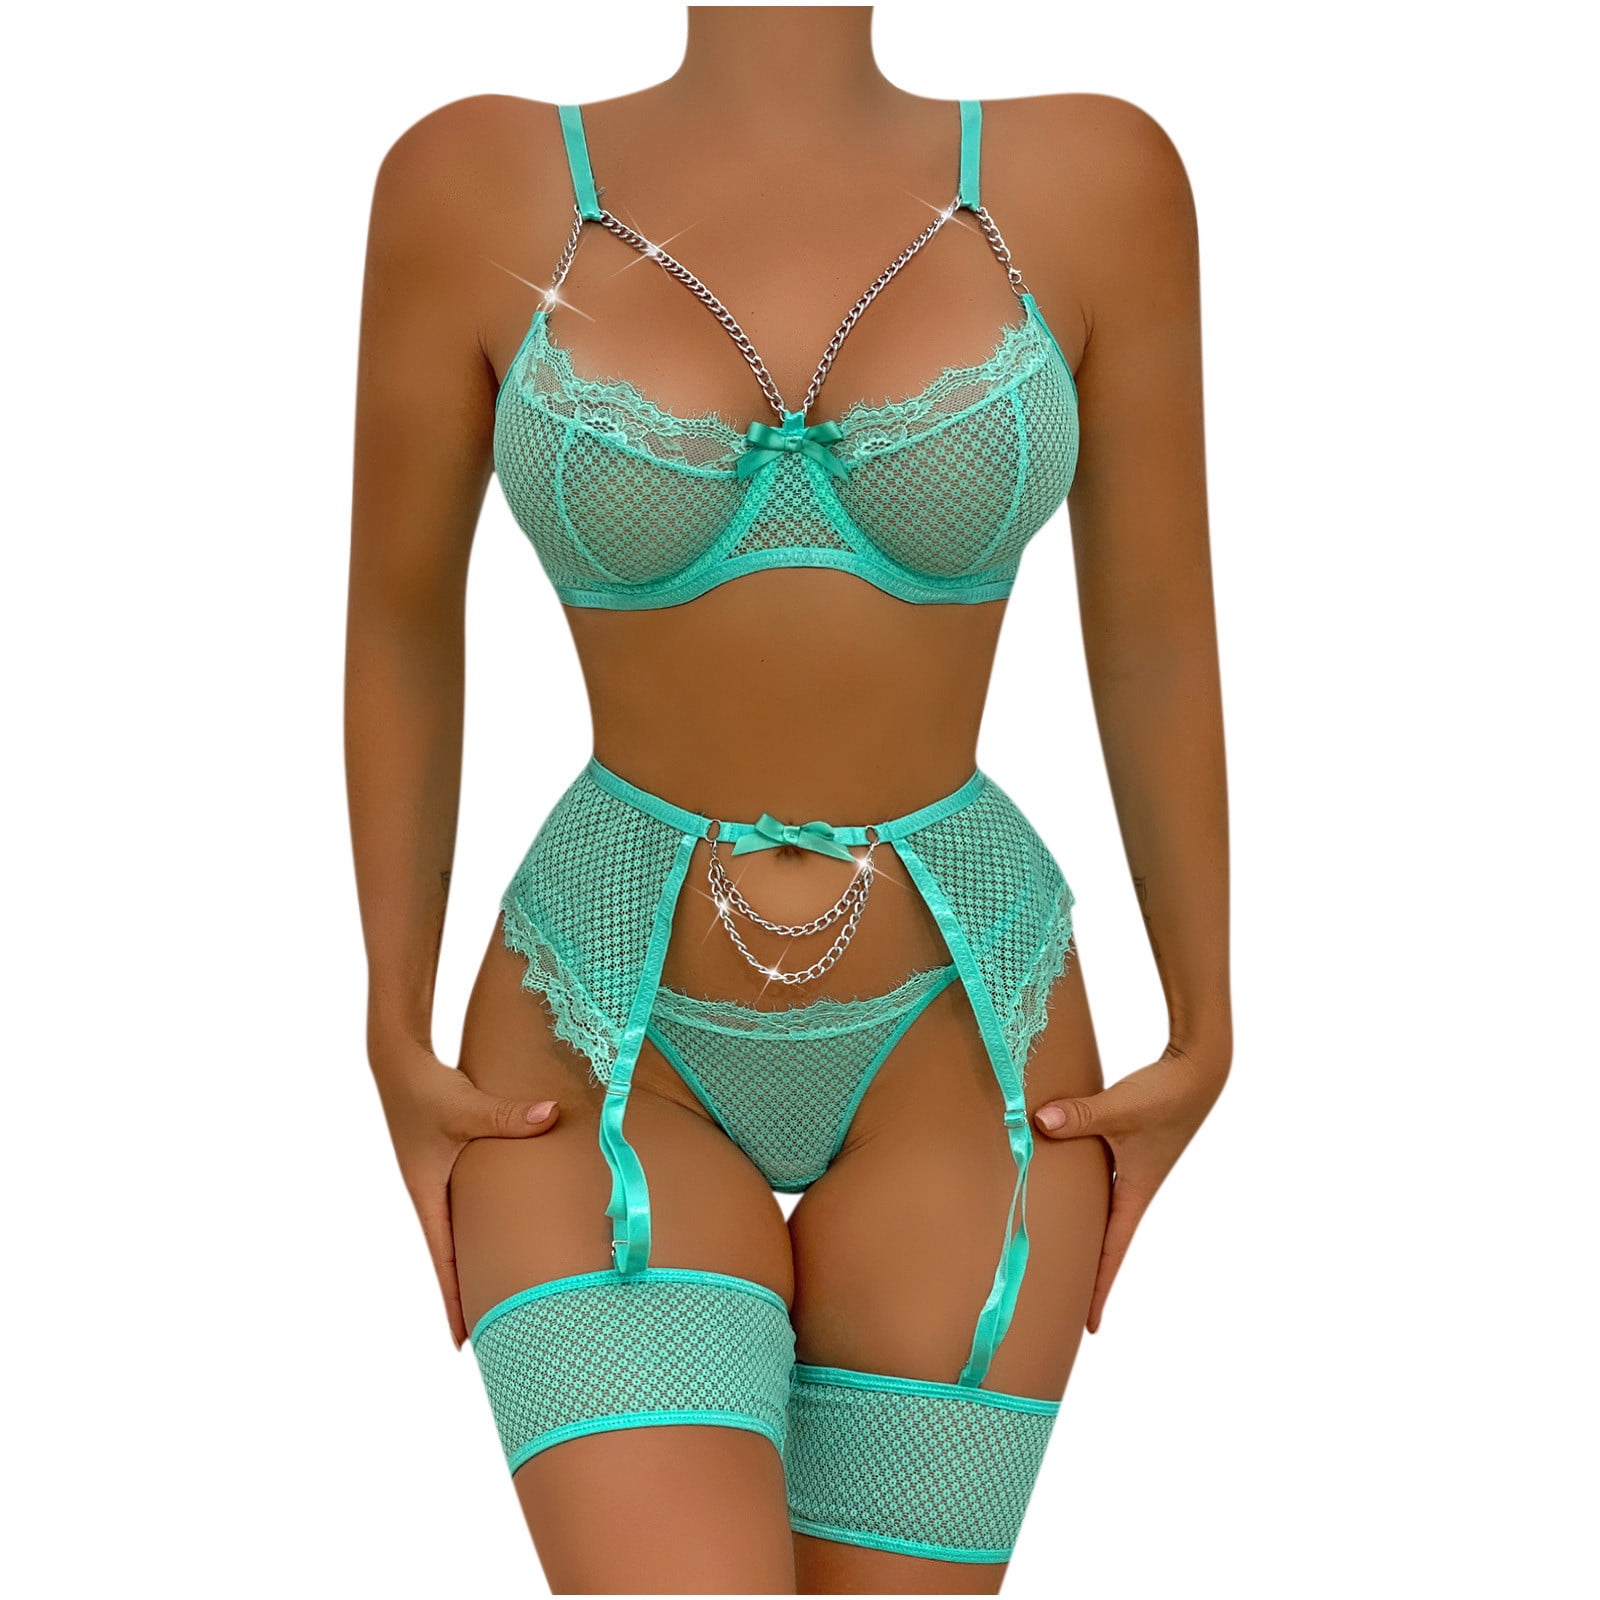 St. Patrick's Day Tawop Stockings For Women Lingerie See-Through Lingerie  3T Onesie Underwear Mint Green Size 4 